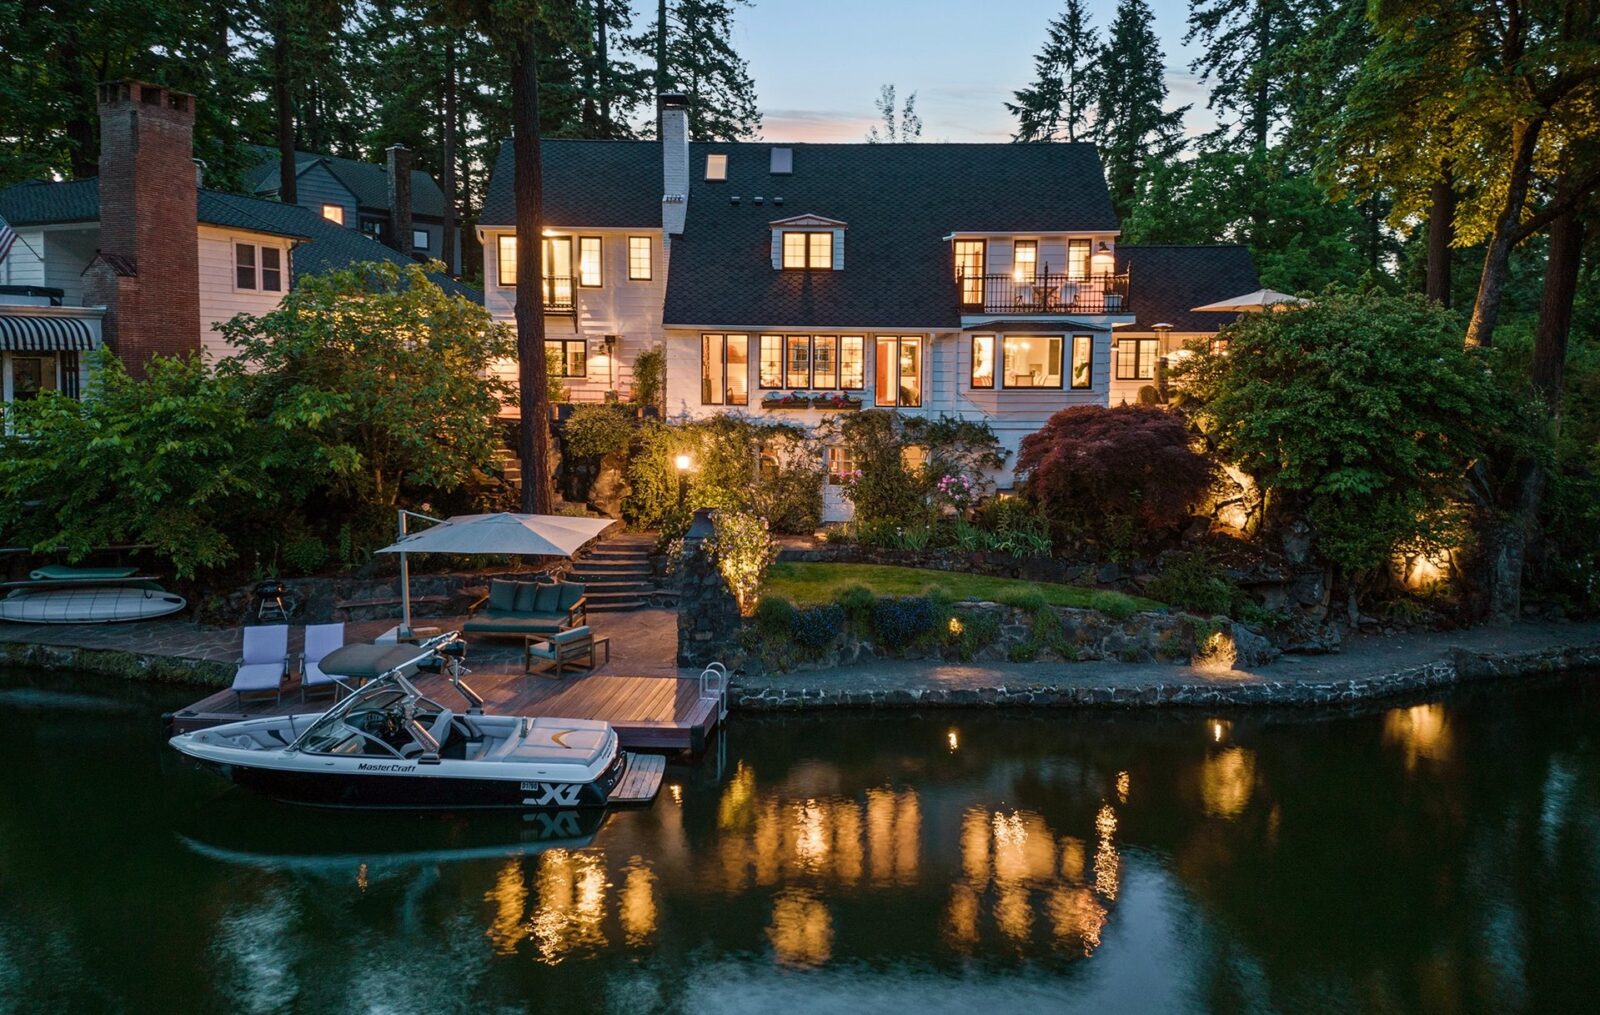 Lakeside Home With Lights On At Night